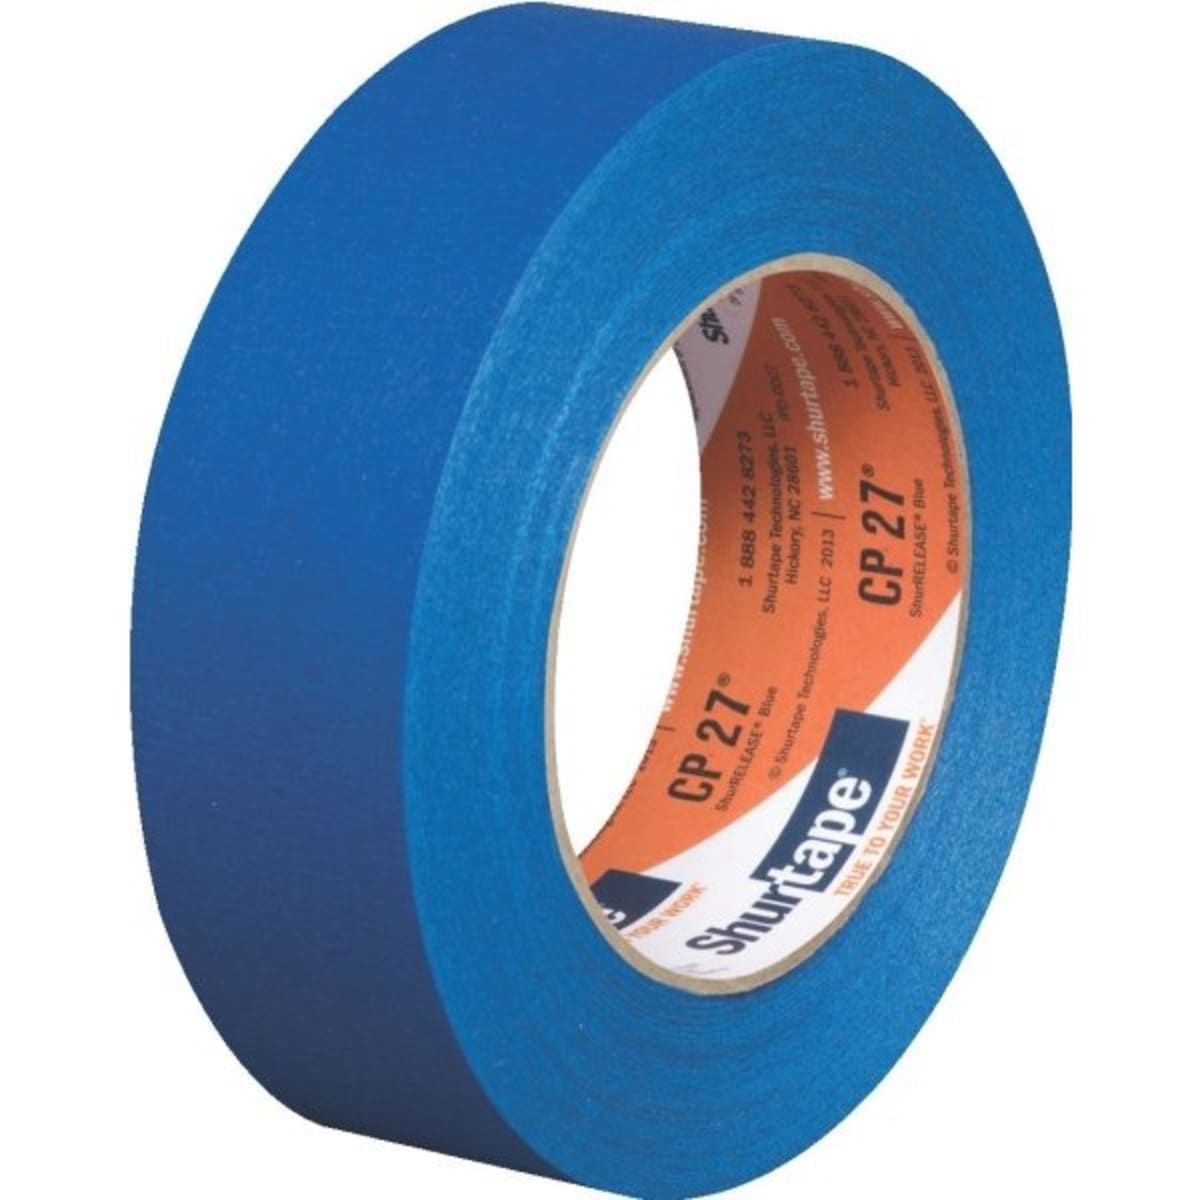 Generic Blue Painters Tape 1 inch Wide, Blue Masking Tape 1 inch X